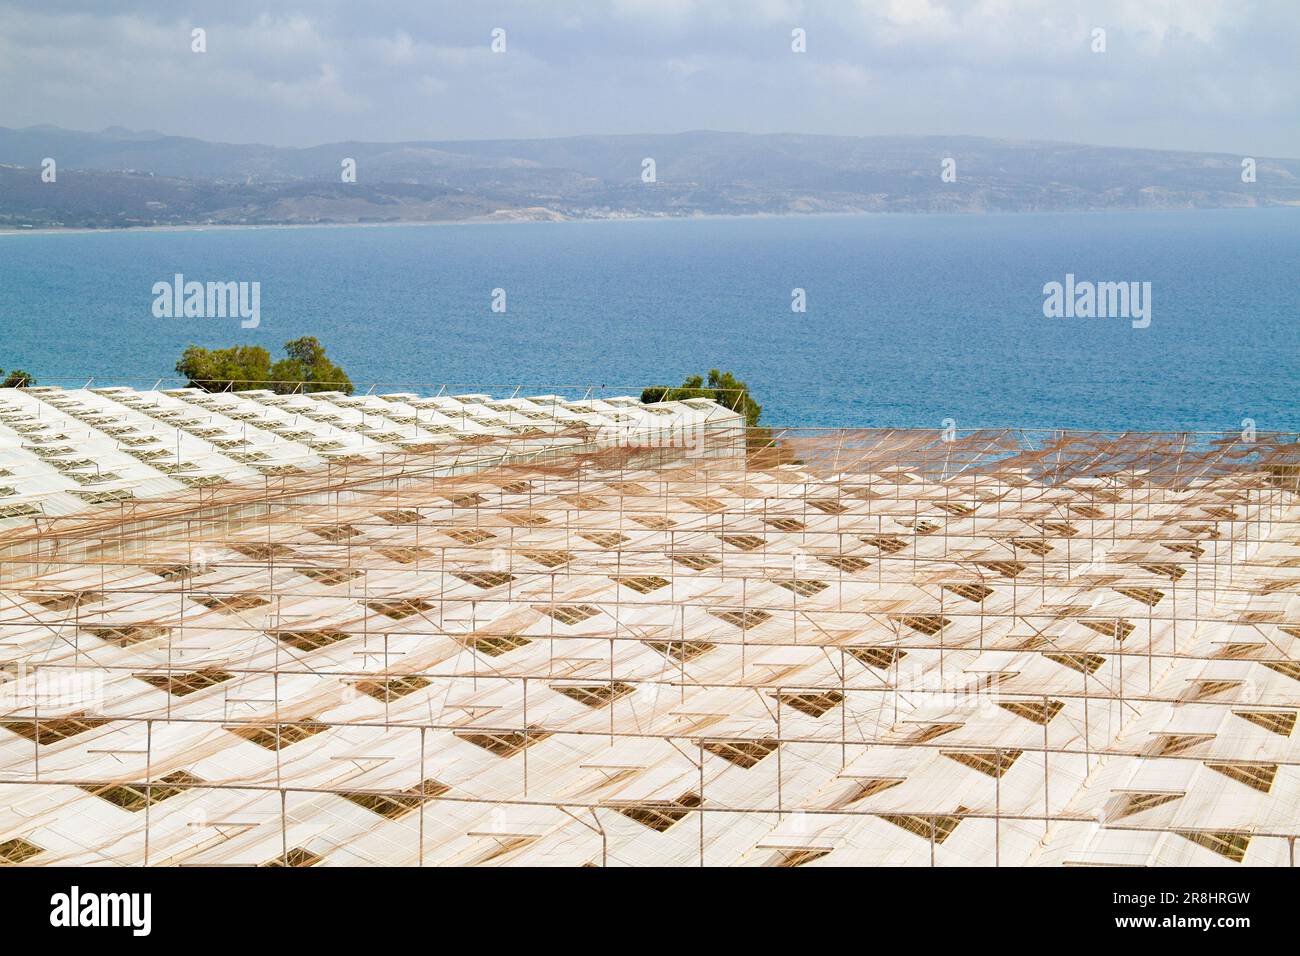 Top view of the roofs of greenhouses with open ventilation windows near the coast of de Mediterranean Stock Photo